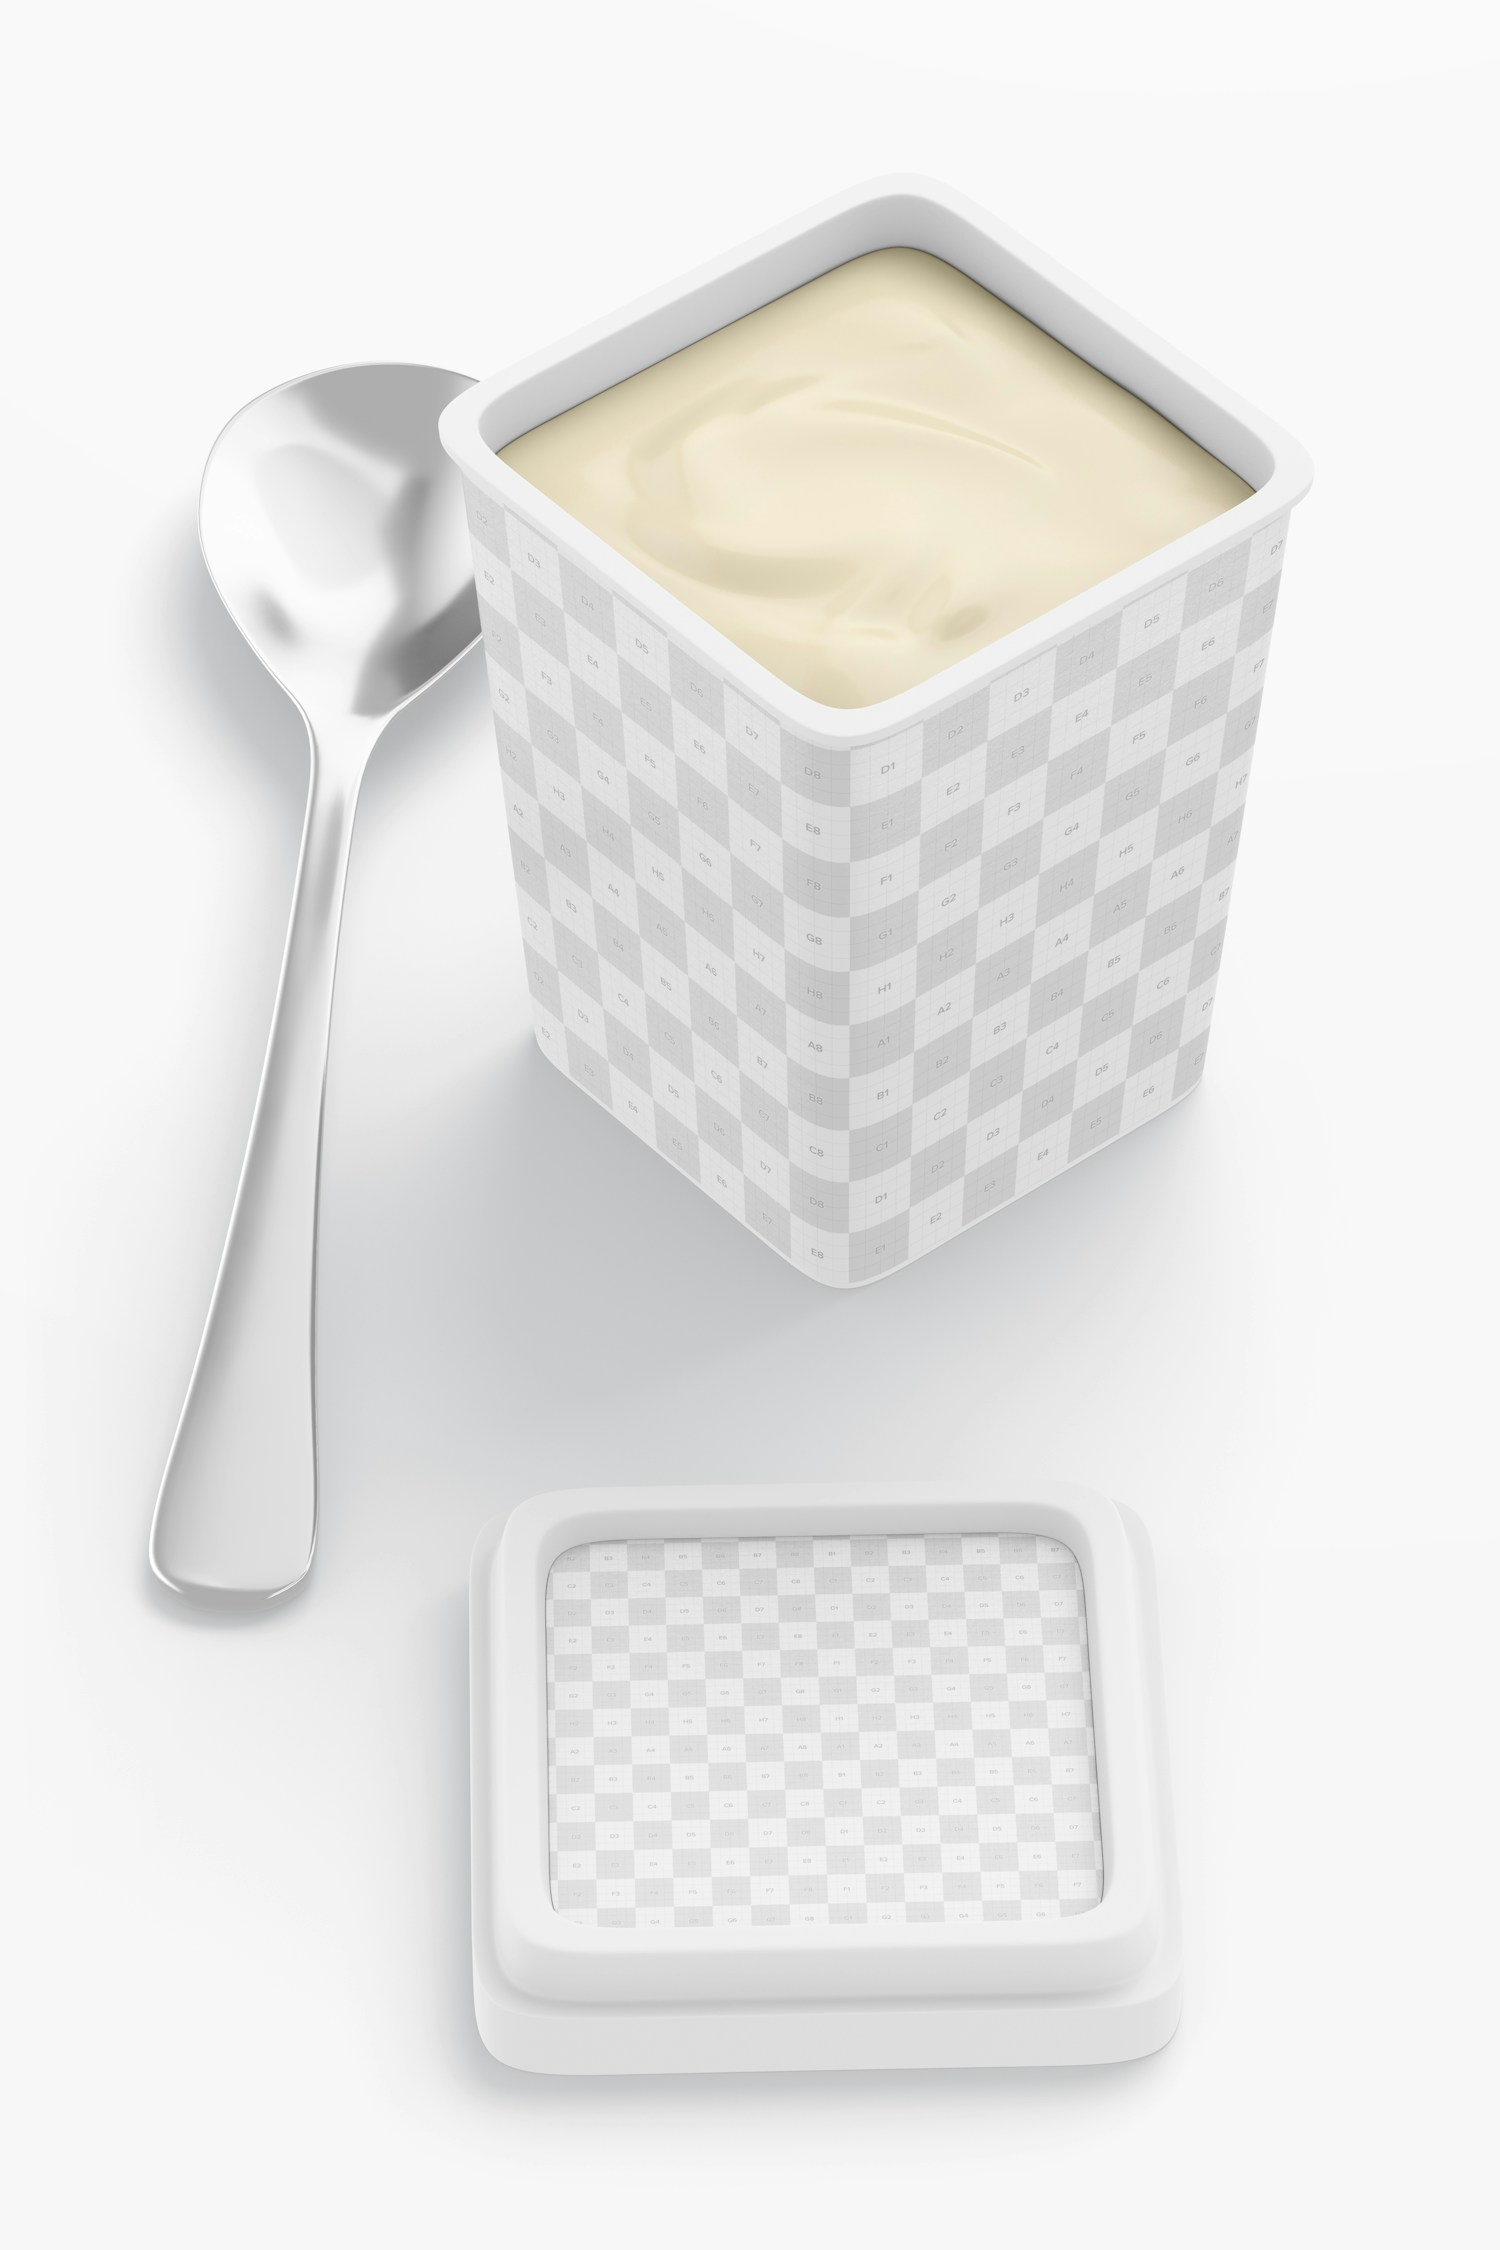 Square Ice Cream Cup Mockup, Top View